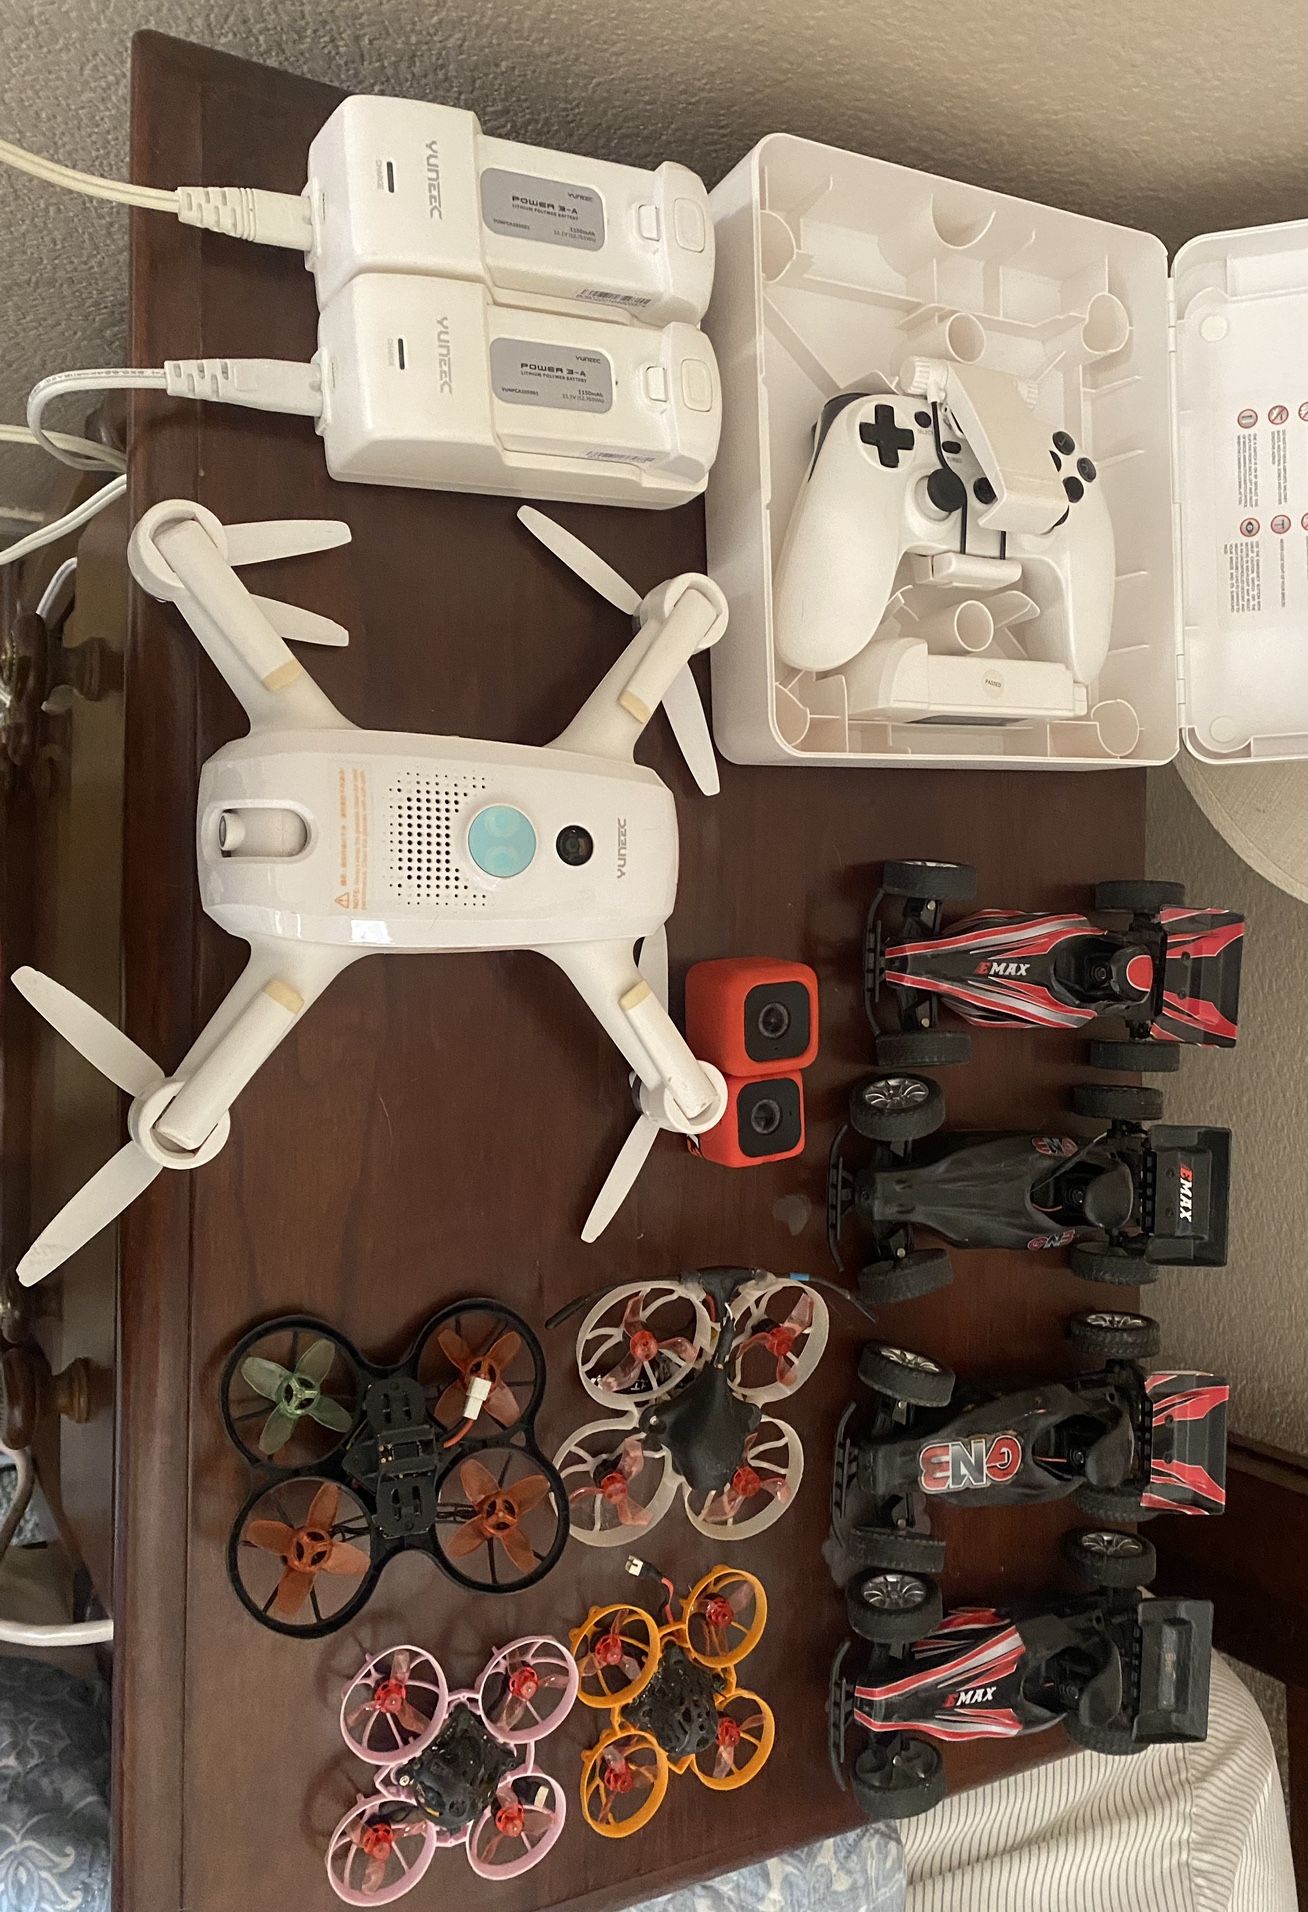 FPV Drones And Equipment 